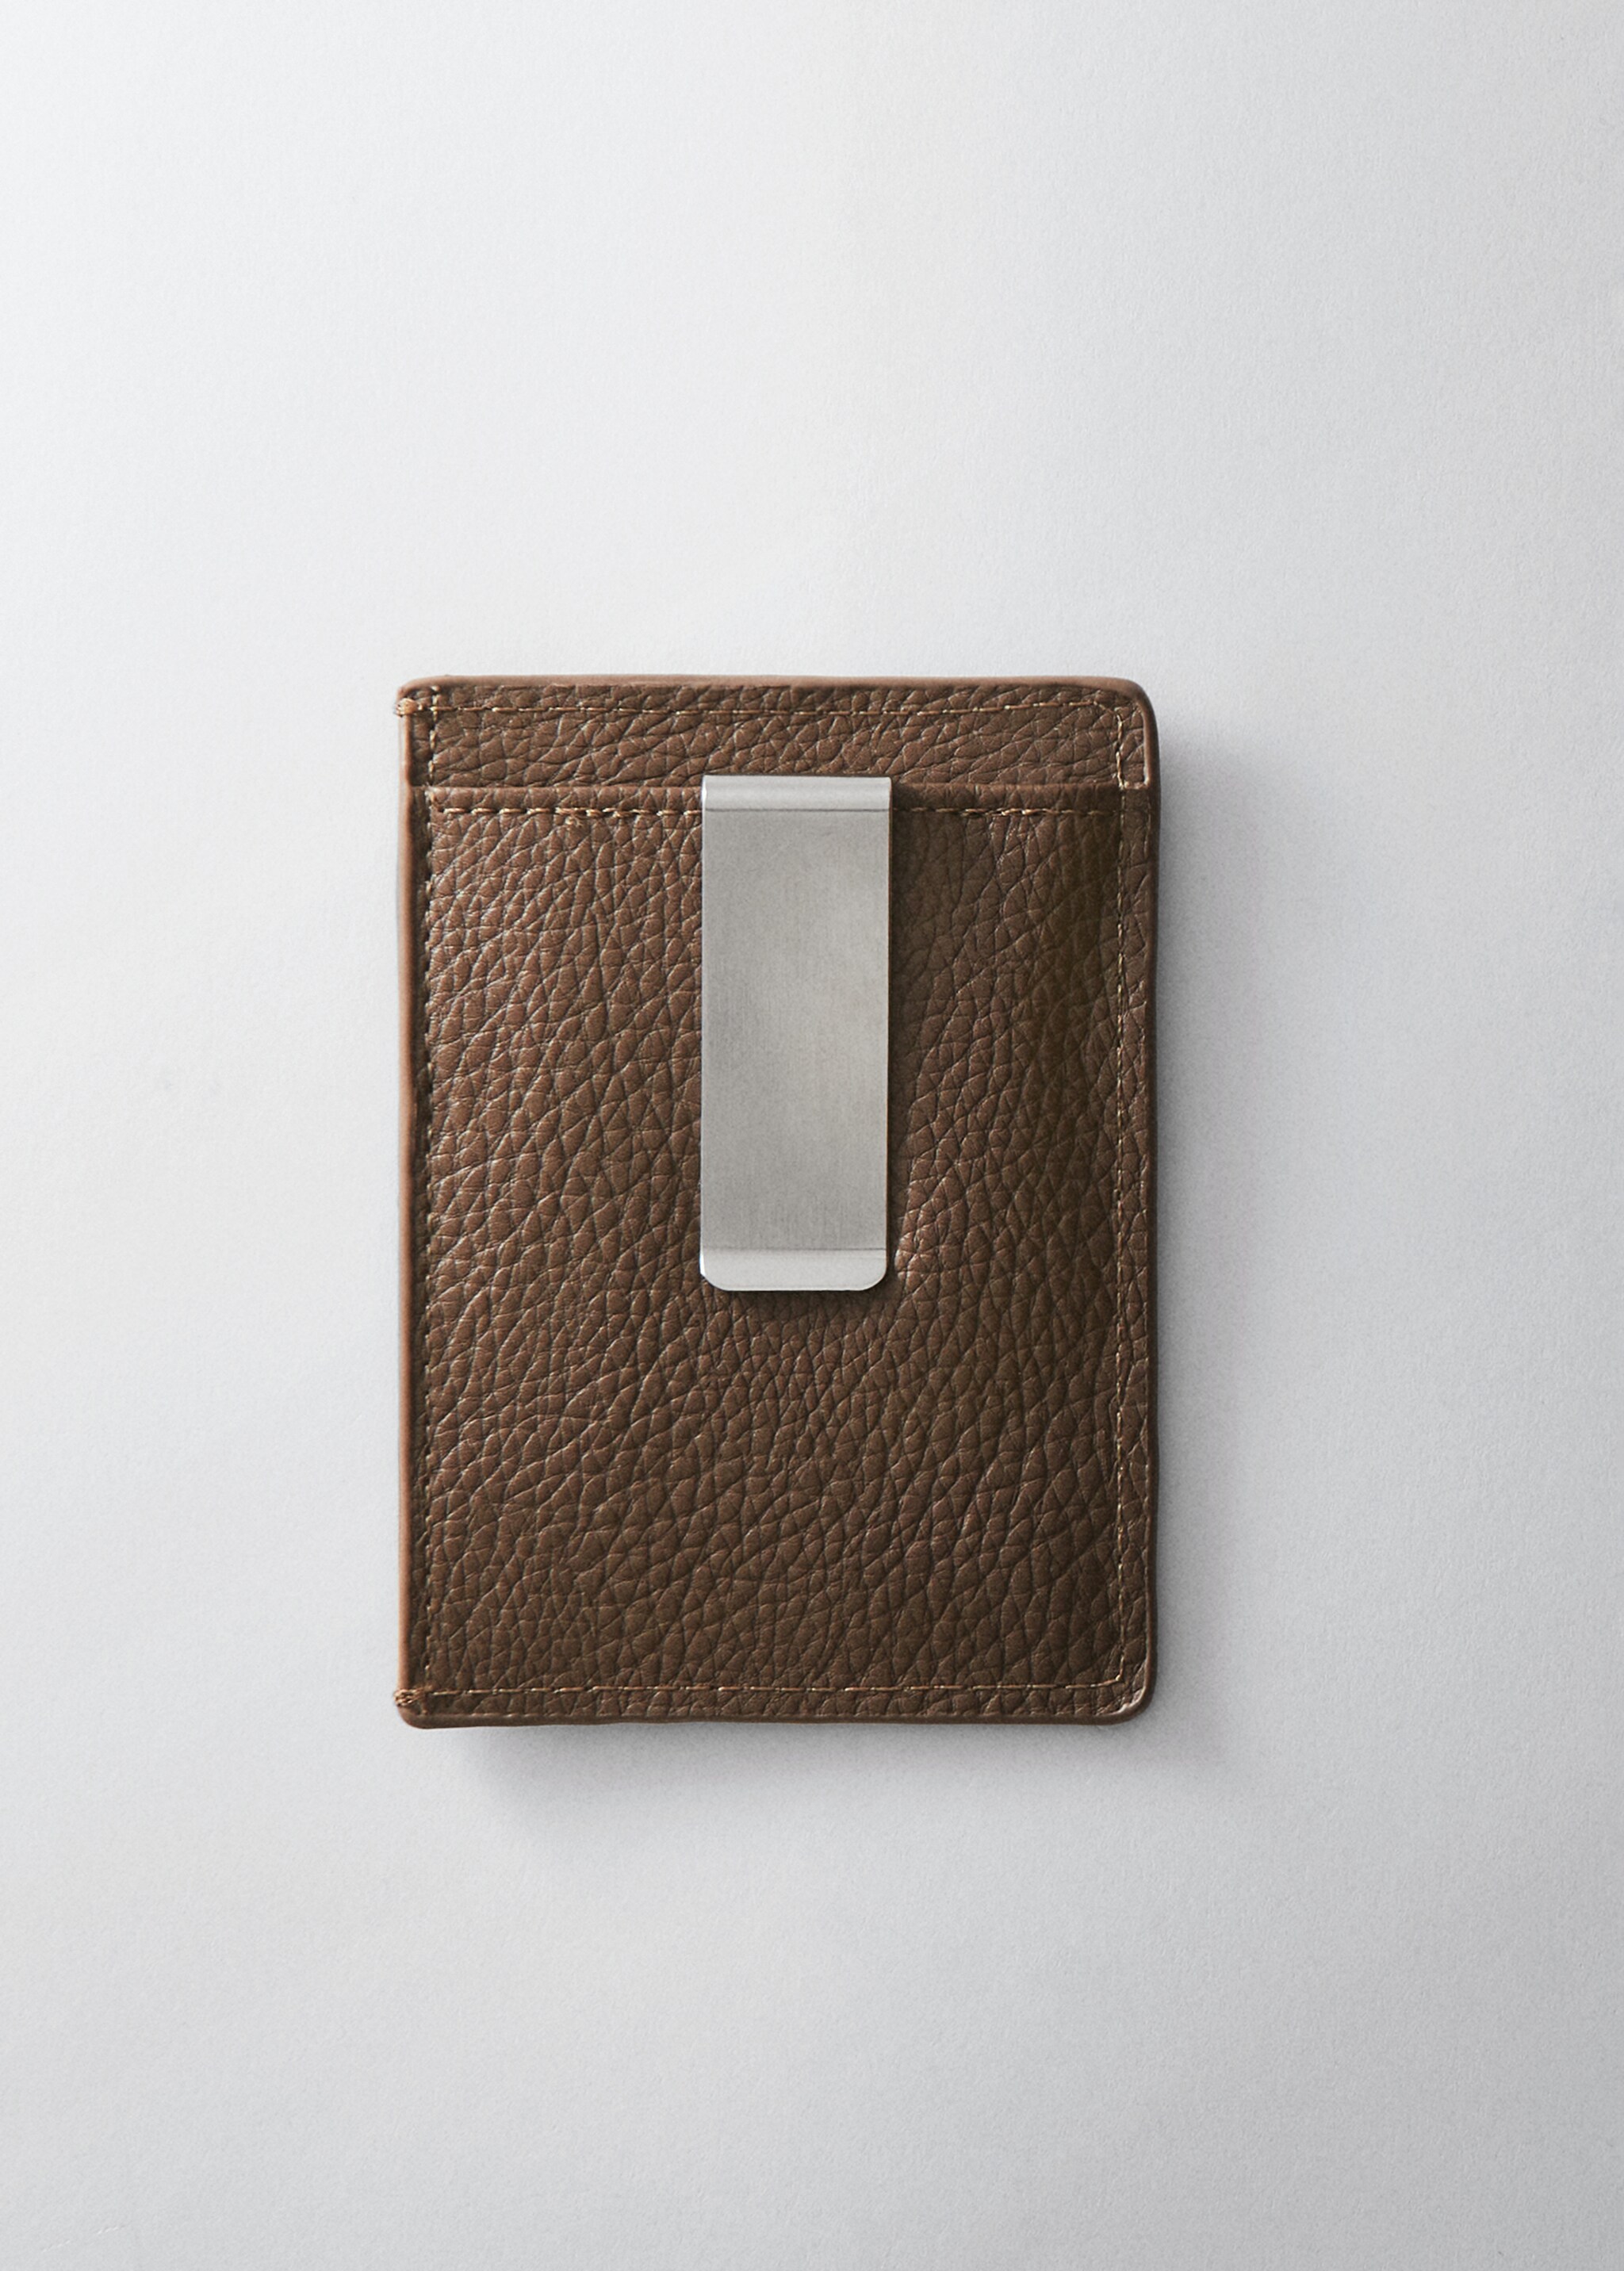 Anti-contactless peaked card holder - Details of the article 9